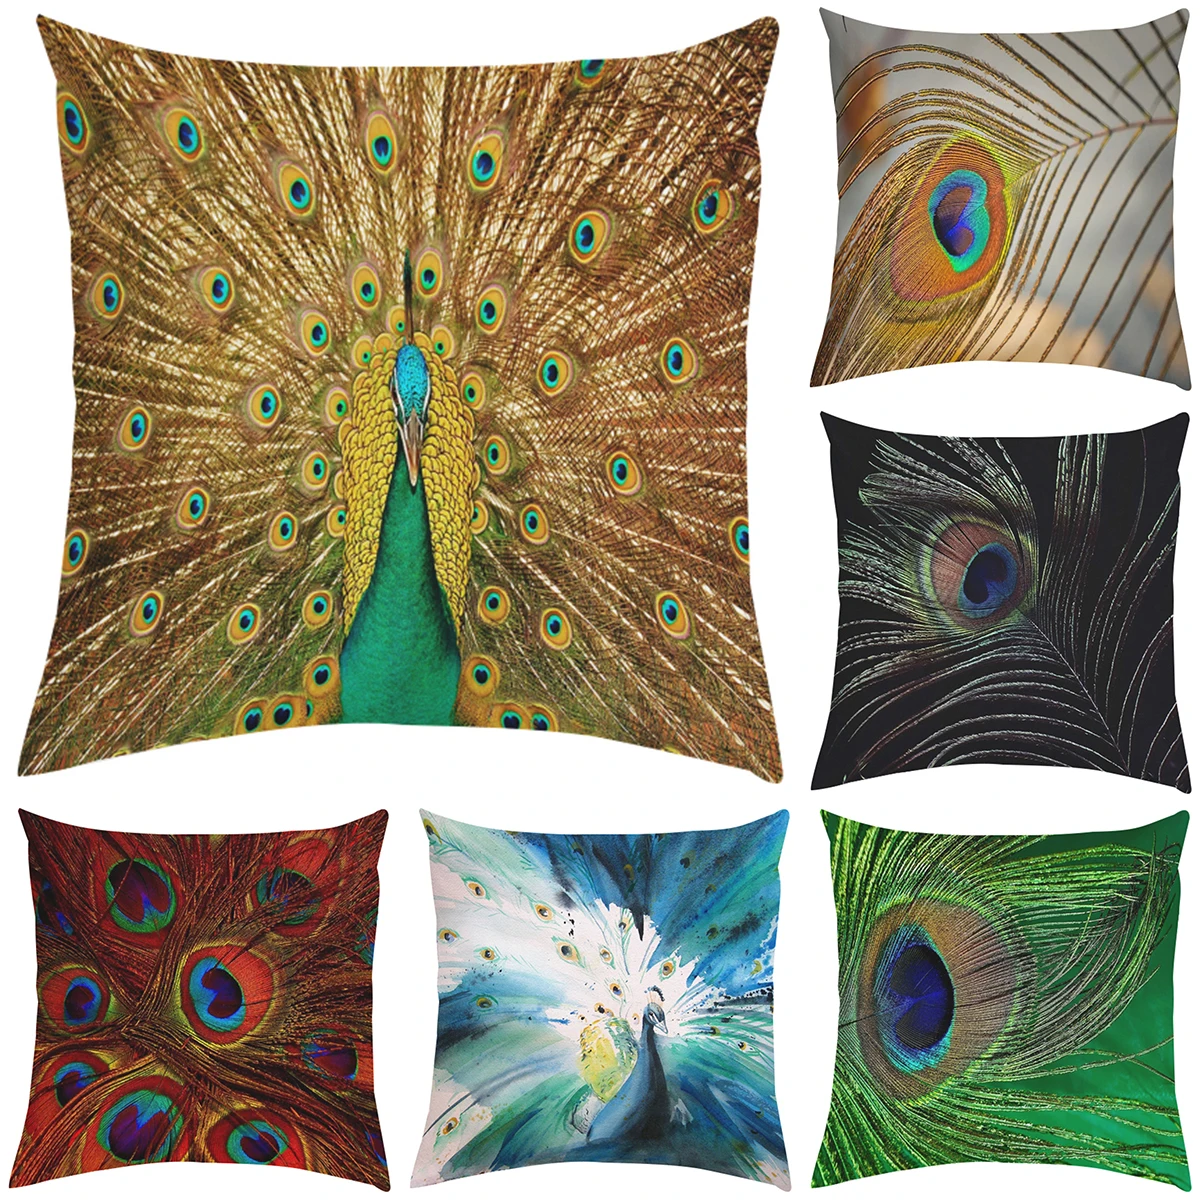 

Peacock Feathers Pillow Cover Sleeping Pillows Decorative Cushion Covers Cushions Home Decor Pillowcases 50x50 Car Decoration